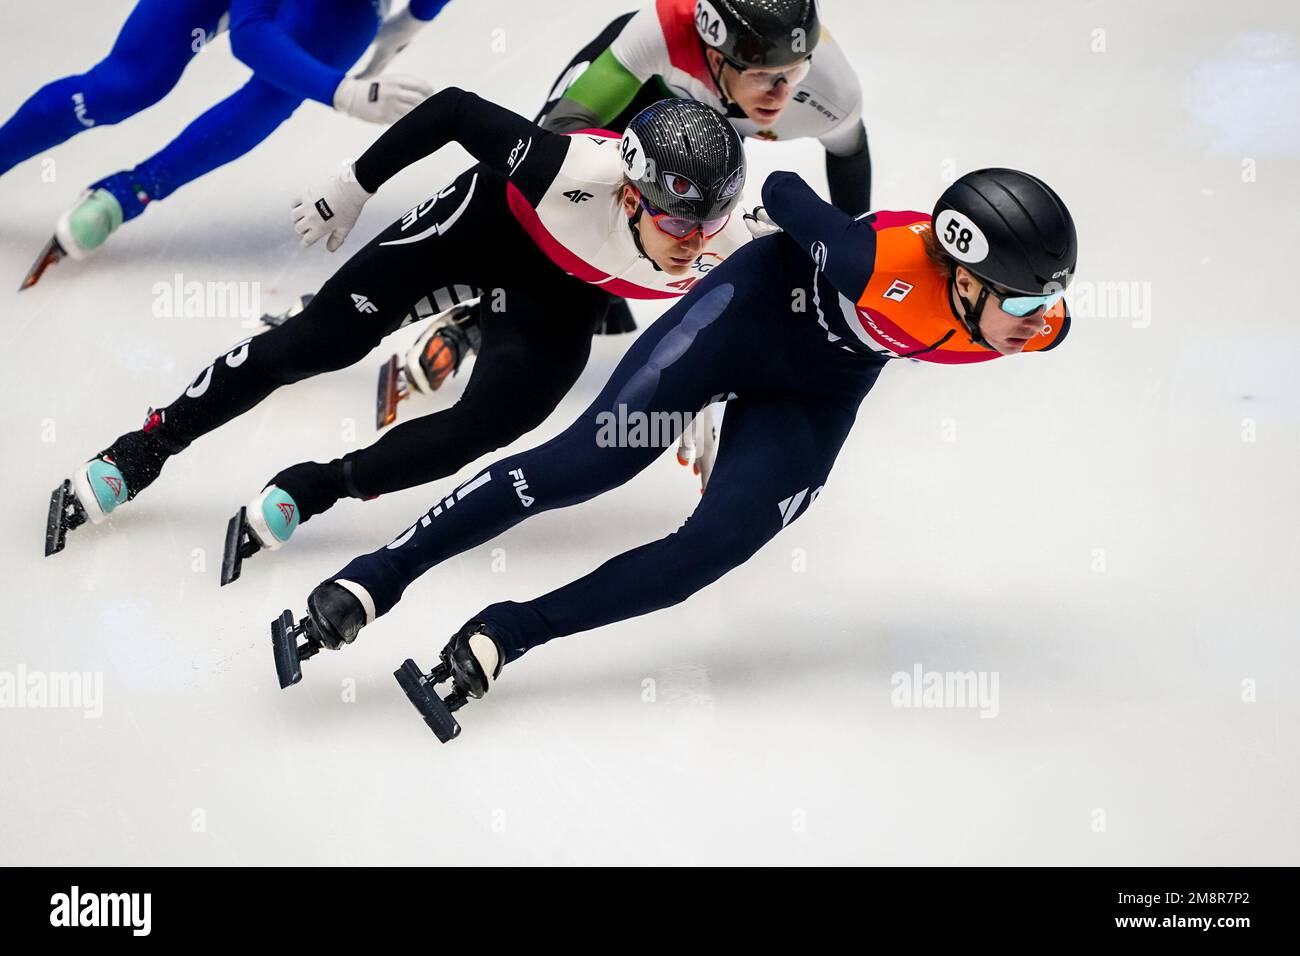 GDANSK, POLAND - JANUARY 15: Jens van 't Wout of the Netherlands and Lukasz Kuczynski of Poland competing in the Men's 1000m Quarter Finals during the ISU European Short Track Championships at Halla Victoria on January 15, 2023 in Gdansk, Poland (Photo by Andre Weening/Orange Pictures) Stock Photo